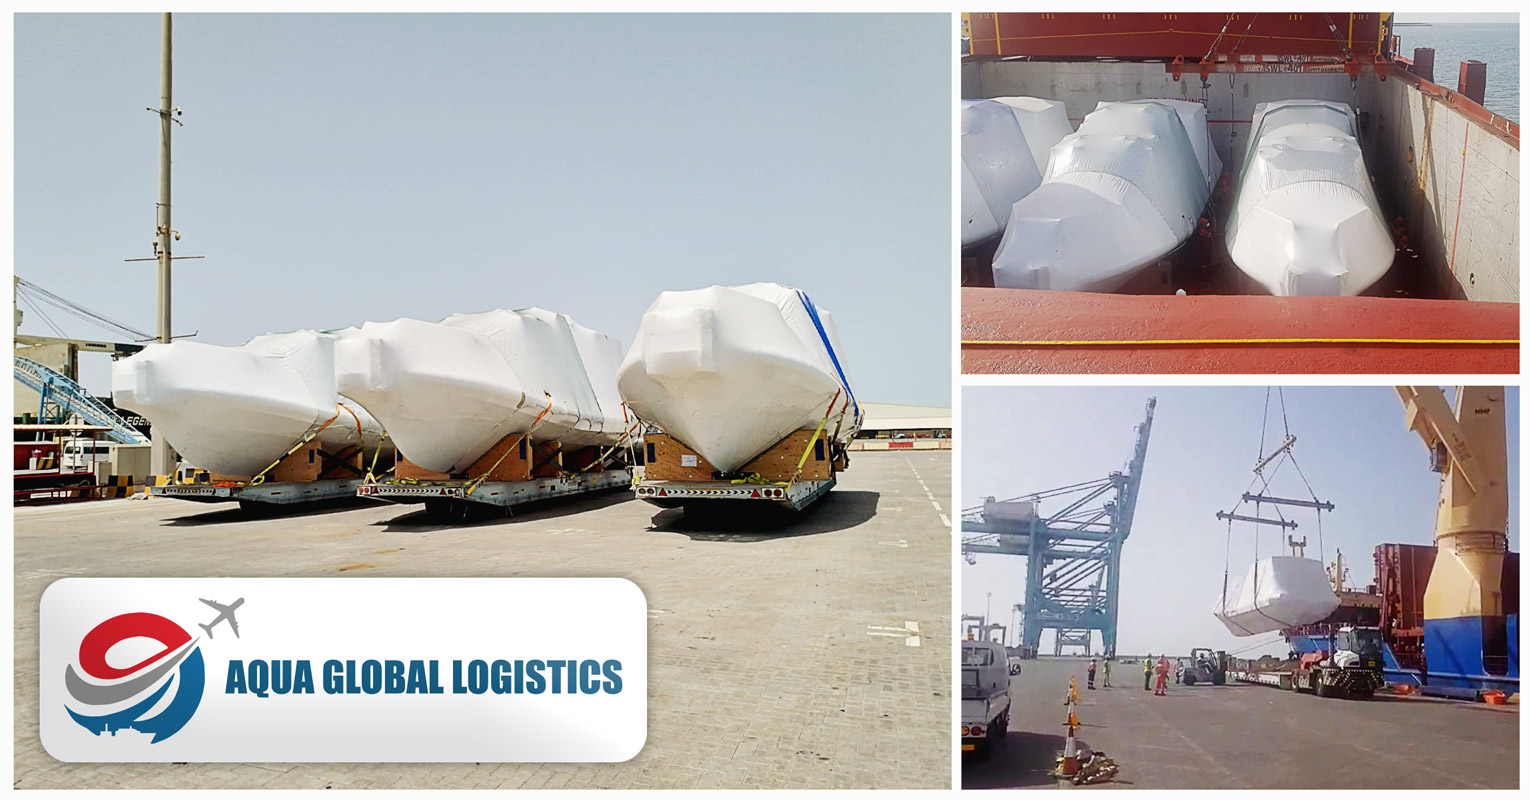 Aqua Global Logistics Handled the Discharge Supervision, Transport and Delivery of 3 Boats to the Coast Guard Base in Bahrain